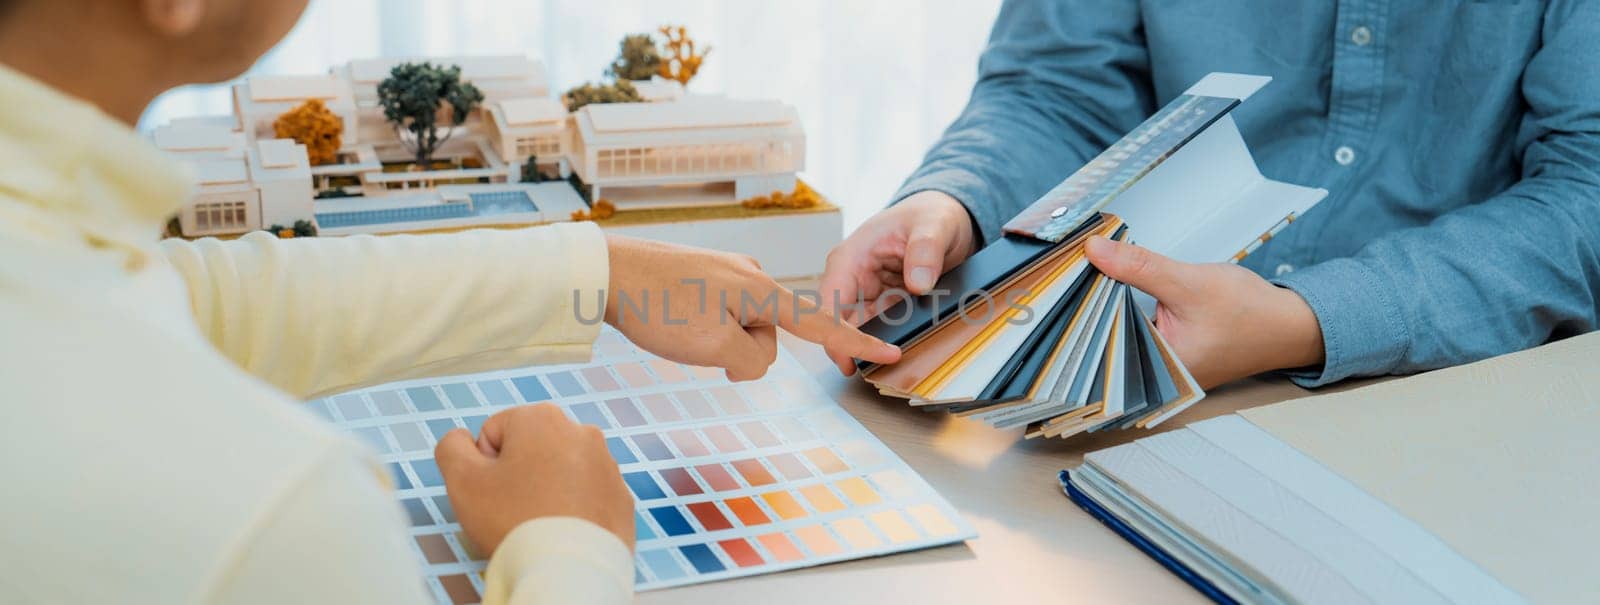 Interior designer team present color selection to project manager with color swatches and architectural model on meeting table. Creative working and design concept. Focus on hand. Variegated.